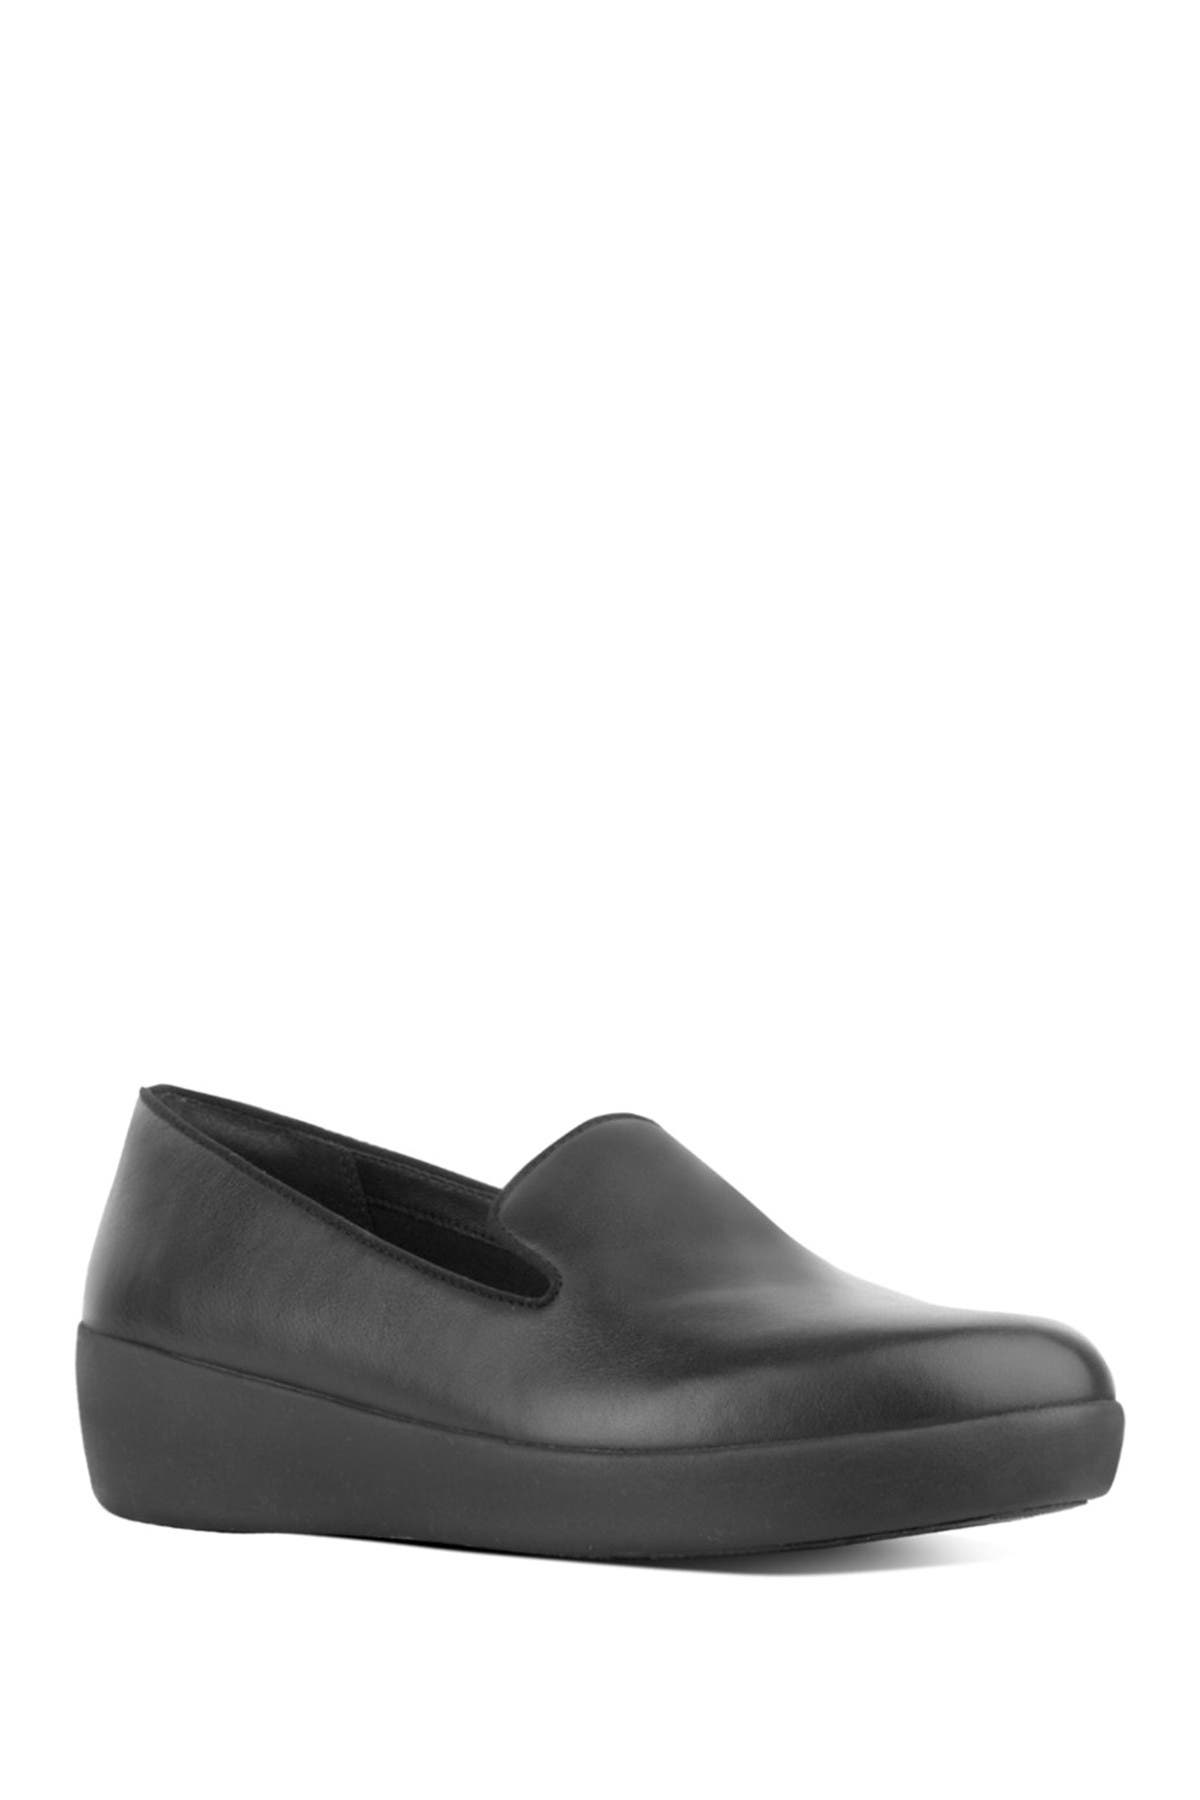 fitflop audrey smoking slippers